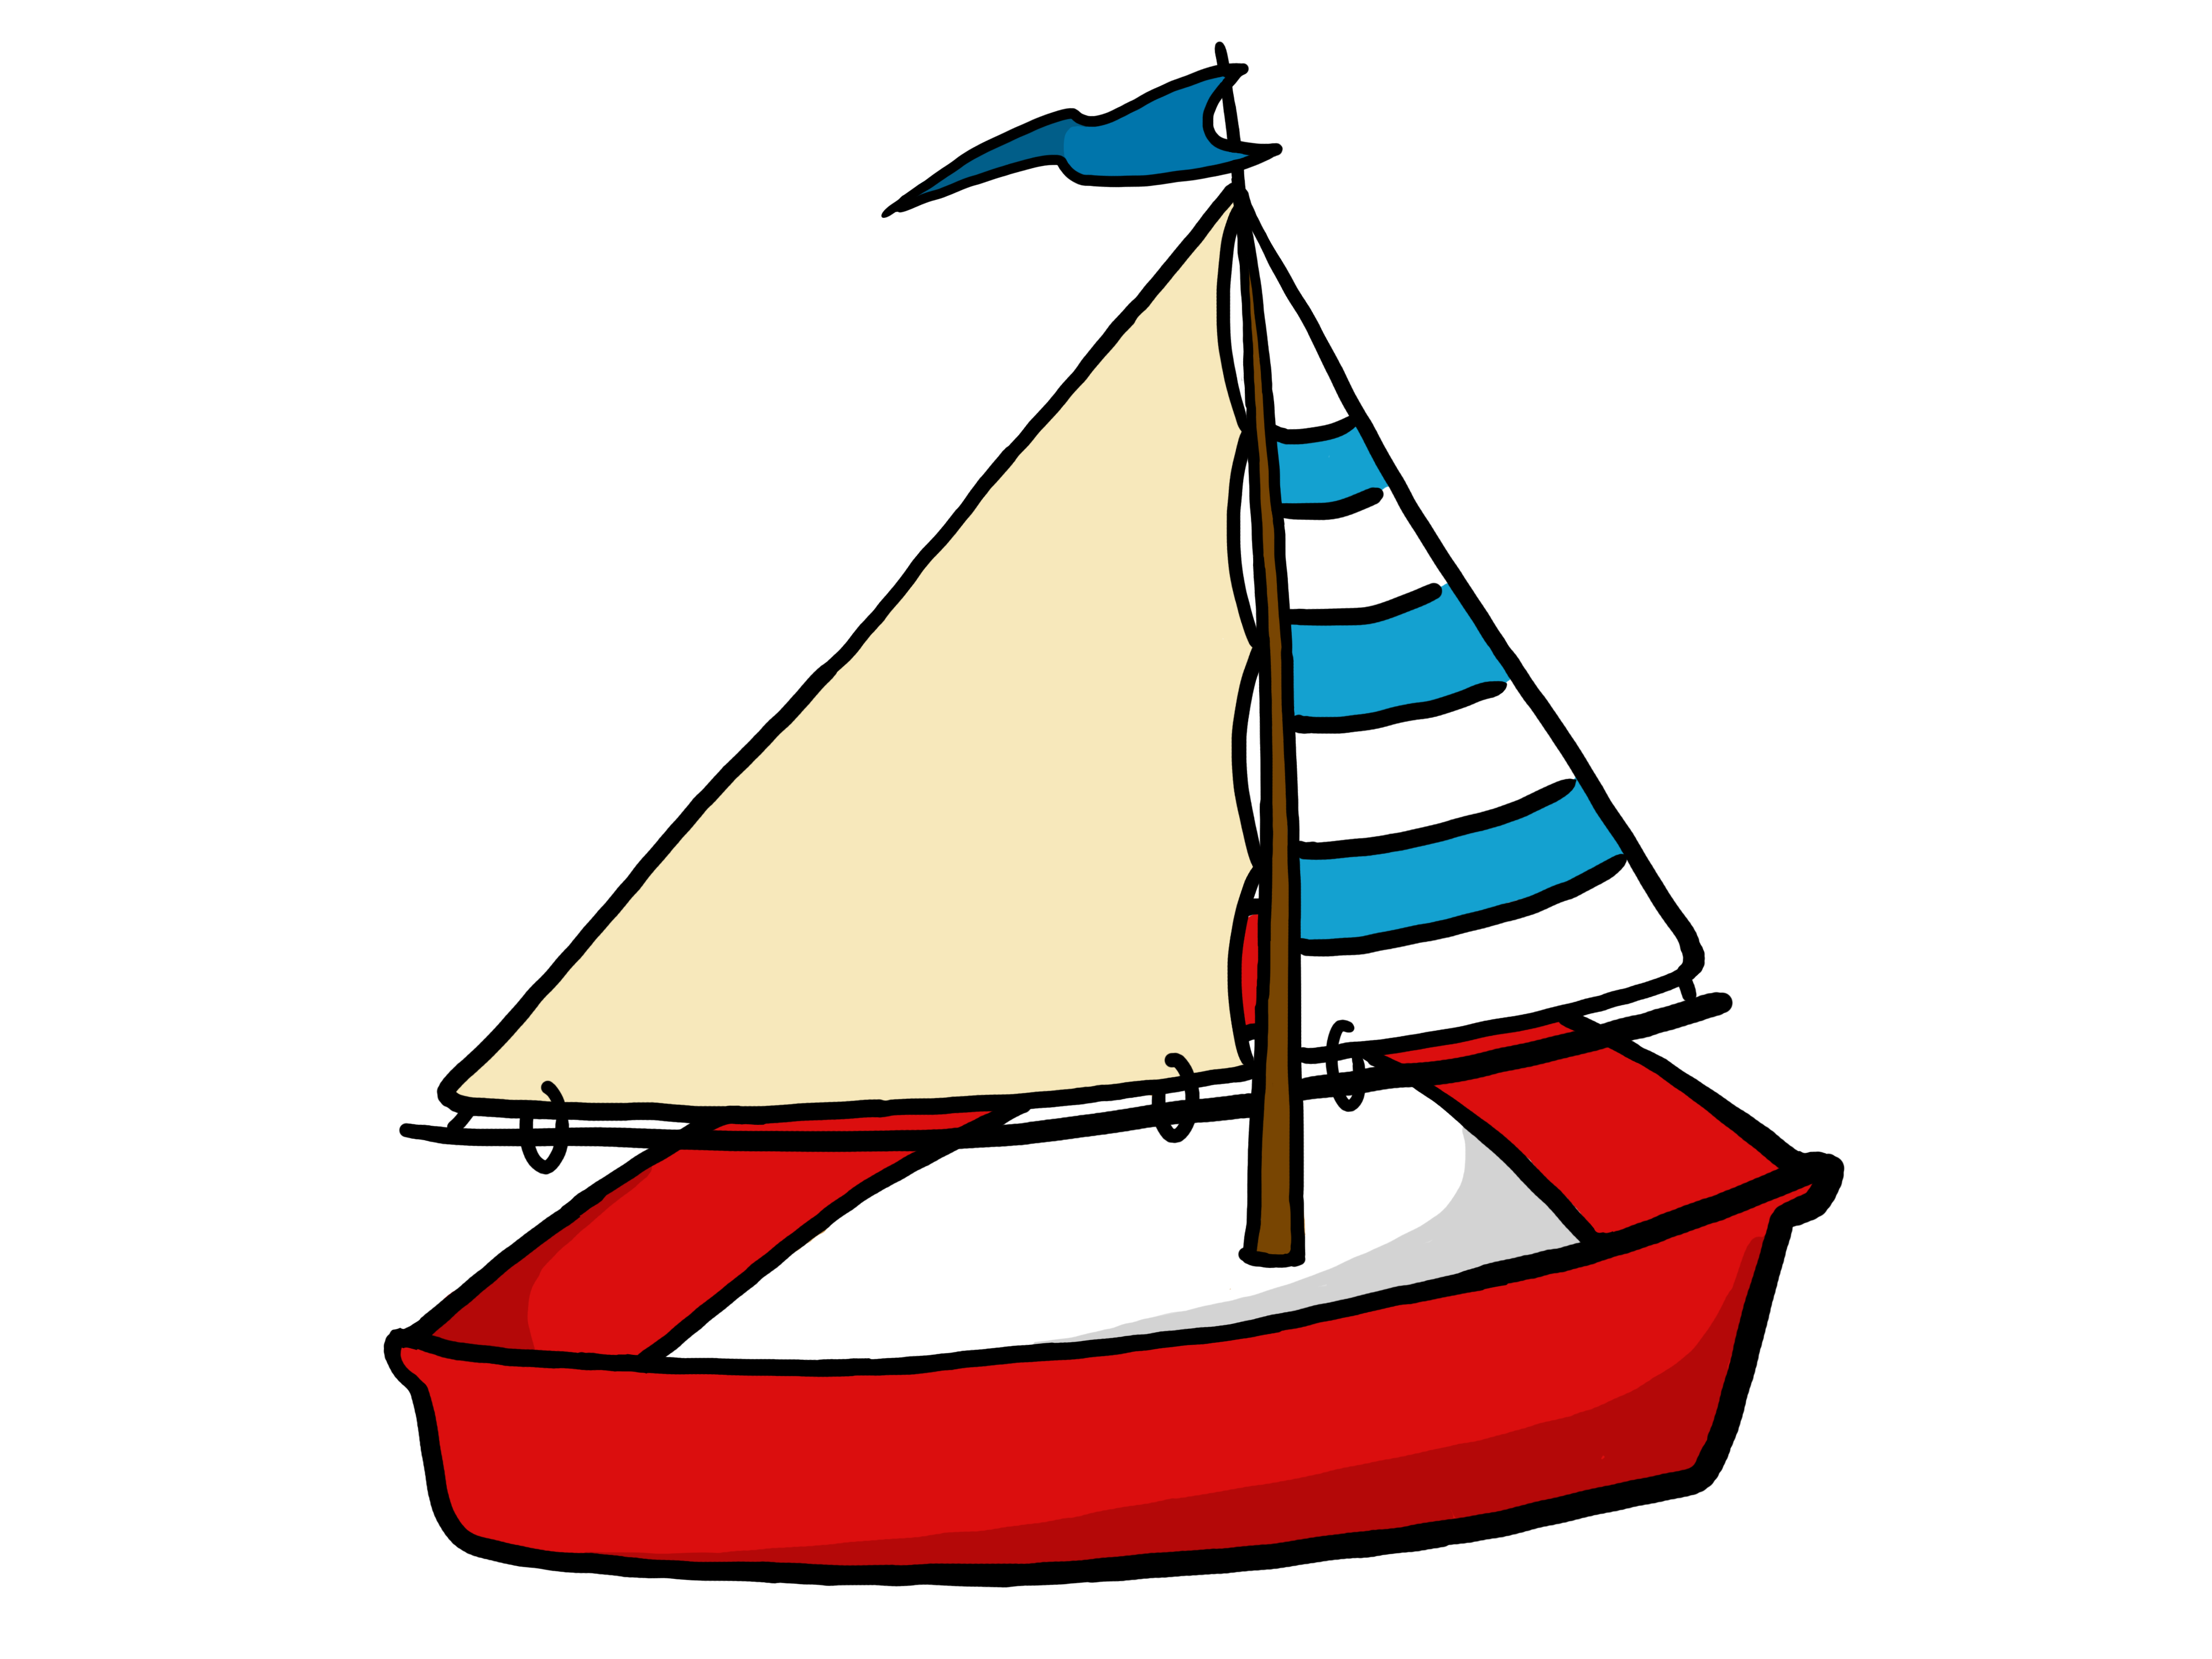 Boating clipart free clipart  - Boat Images Clip Art